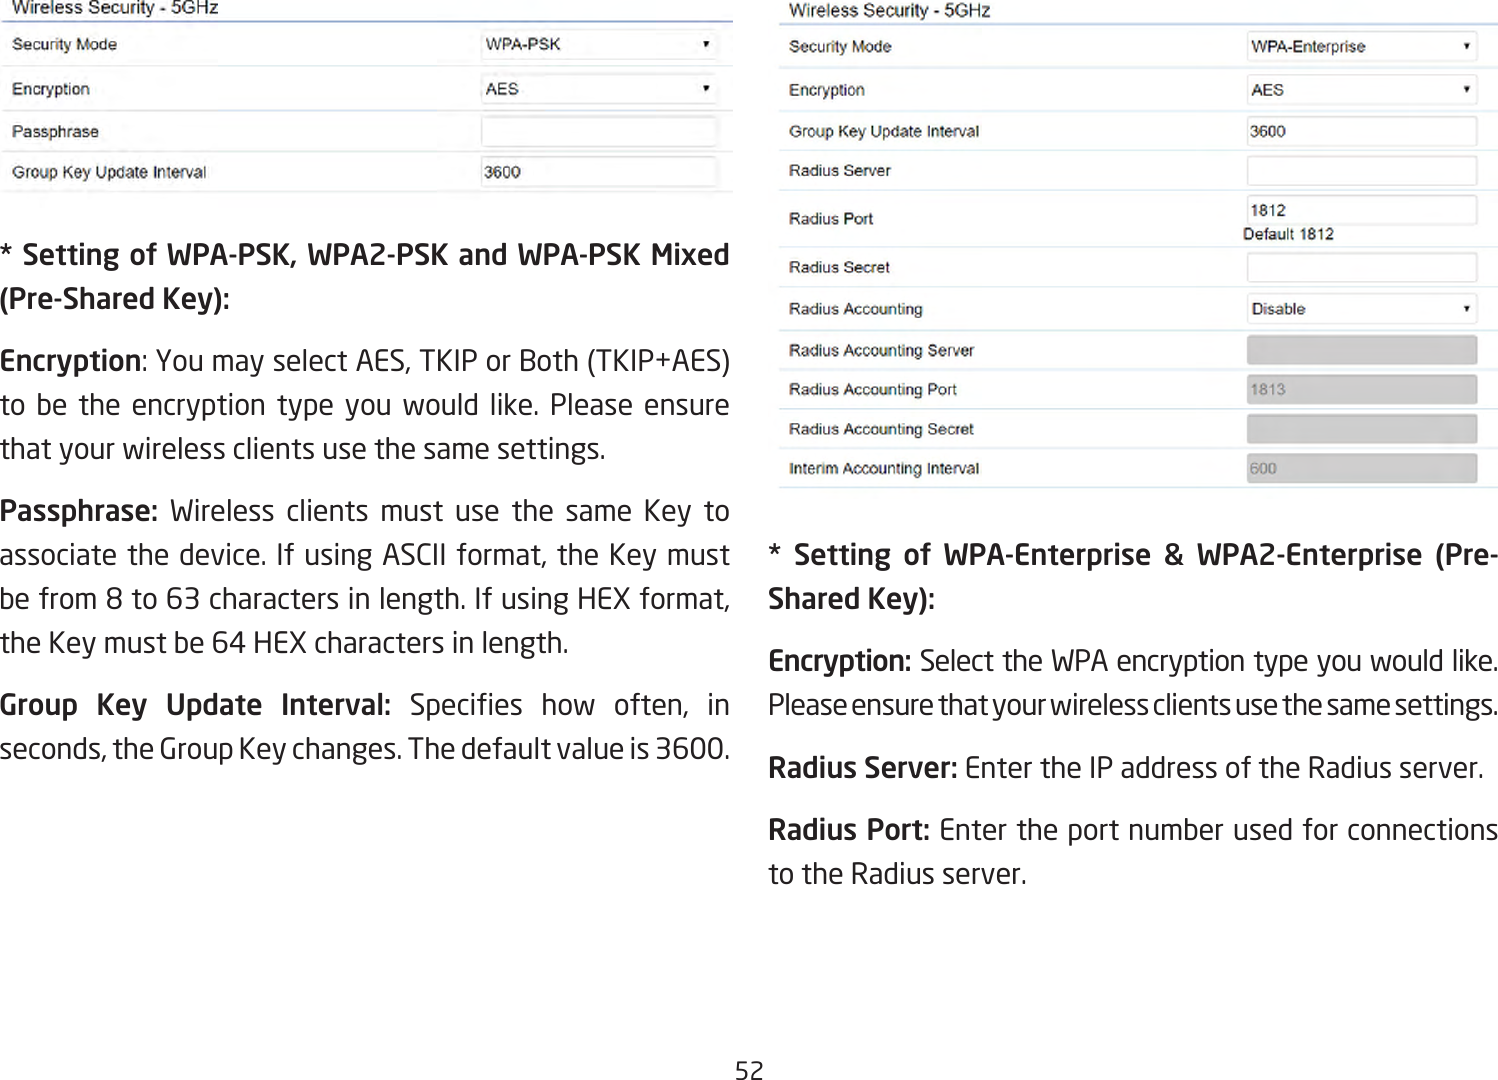 52* Setting of WPA-PSK, WPA2-PSK and WPA-PSK Mixed (Pre-Shared Key):Encryption:YoumayselectAES,TKIPorBoth(TKIP+AES)to be the encryption type you would like. Please ensure that your wireless clients use the same settings.Passphrase:  Wireless clients must use the same Key toassociatethedevice.IfusingASCIIformat,theKeymustbefrom8to63charactersinlength.IfusingHEXformat,theKeymustbe64HEXcharactersinlength.Group Key Update Interval: Species how often, inseconds,theGroupKeychanges.Thedefaultvalueis3600.** Setting of WPA-Enterprise &amp; WPA2-Enterprise (Pre-Shared Key):Encryption: Select the WPA encryption type you would like. Please ensure that your wireless clients use the same settings.Radius Server: Enter the IP address of the Radius server.Radius Port: Enter the port number used for connections to the Radius server.